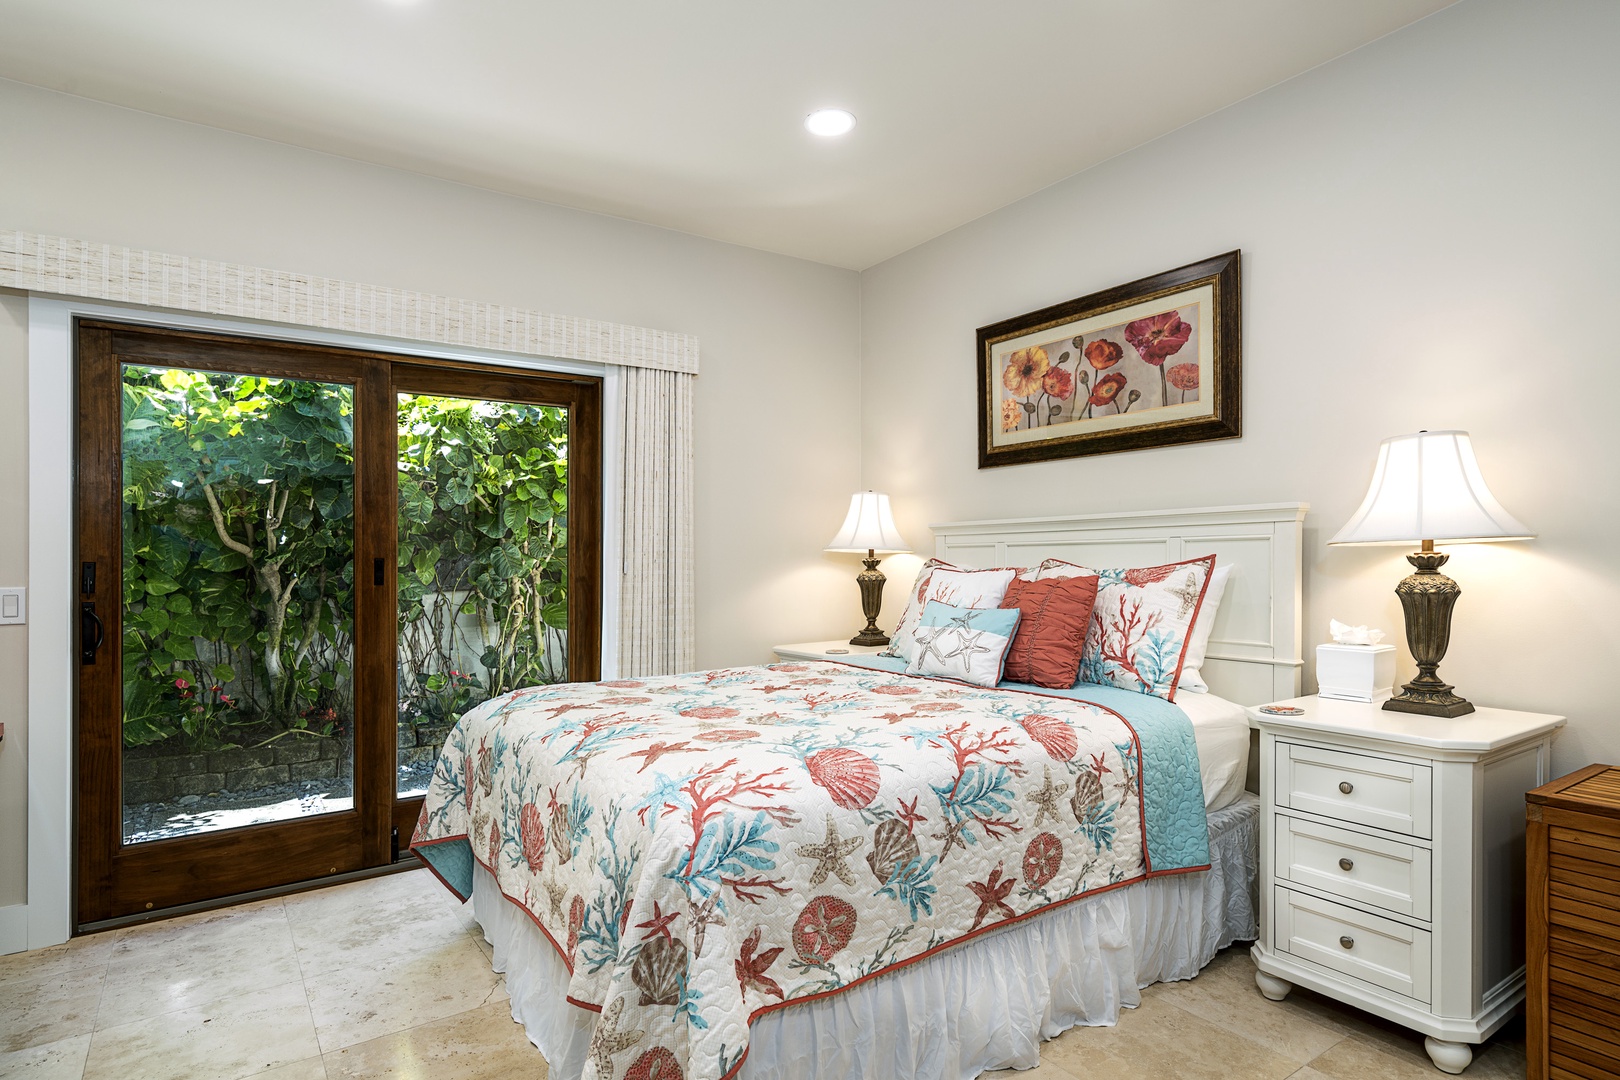 Kailua Kona Vacation Rentals, Ali'i Point #7 - The third bedroom is located downstairs and has a Queen. This bedroom has easy access to a full bathroom and a separate laundry room